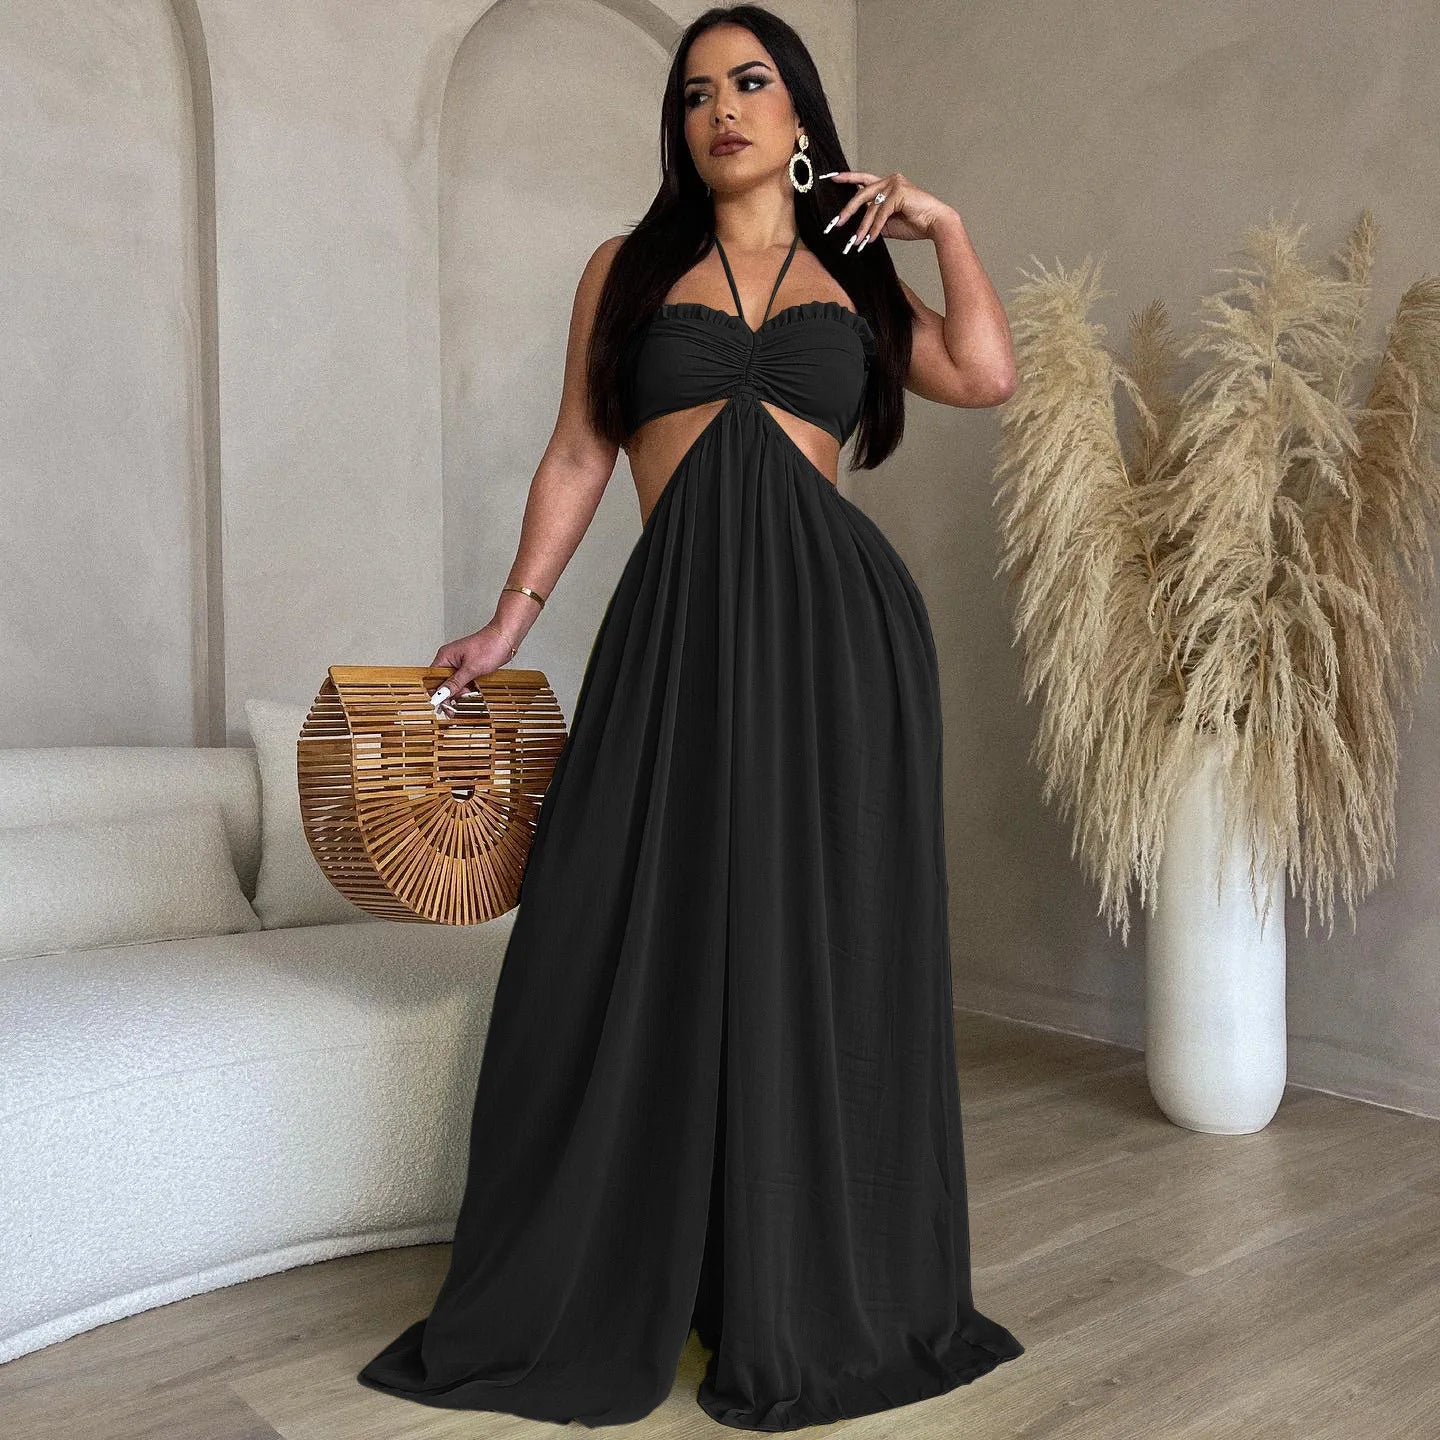 Summer Fashion Sexy Chiffon Wrapped Chest Bare Back Broadfoot Jumpsuit Women's Solid Color Casual Elegant Suspender Jumpsuit